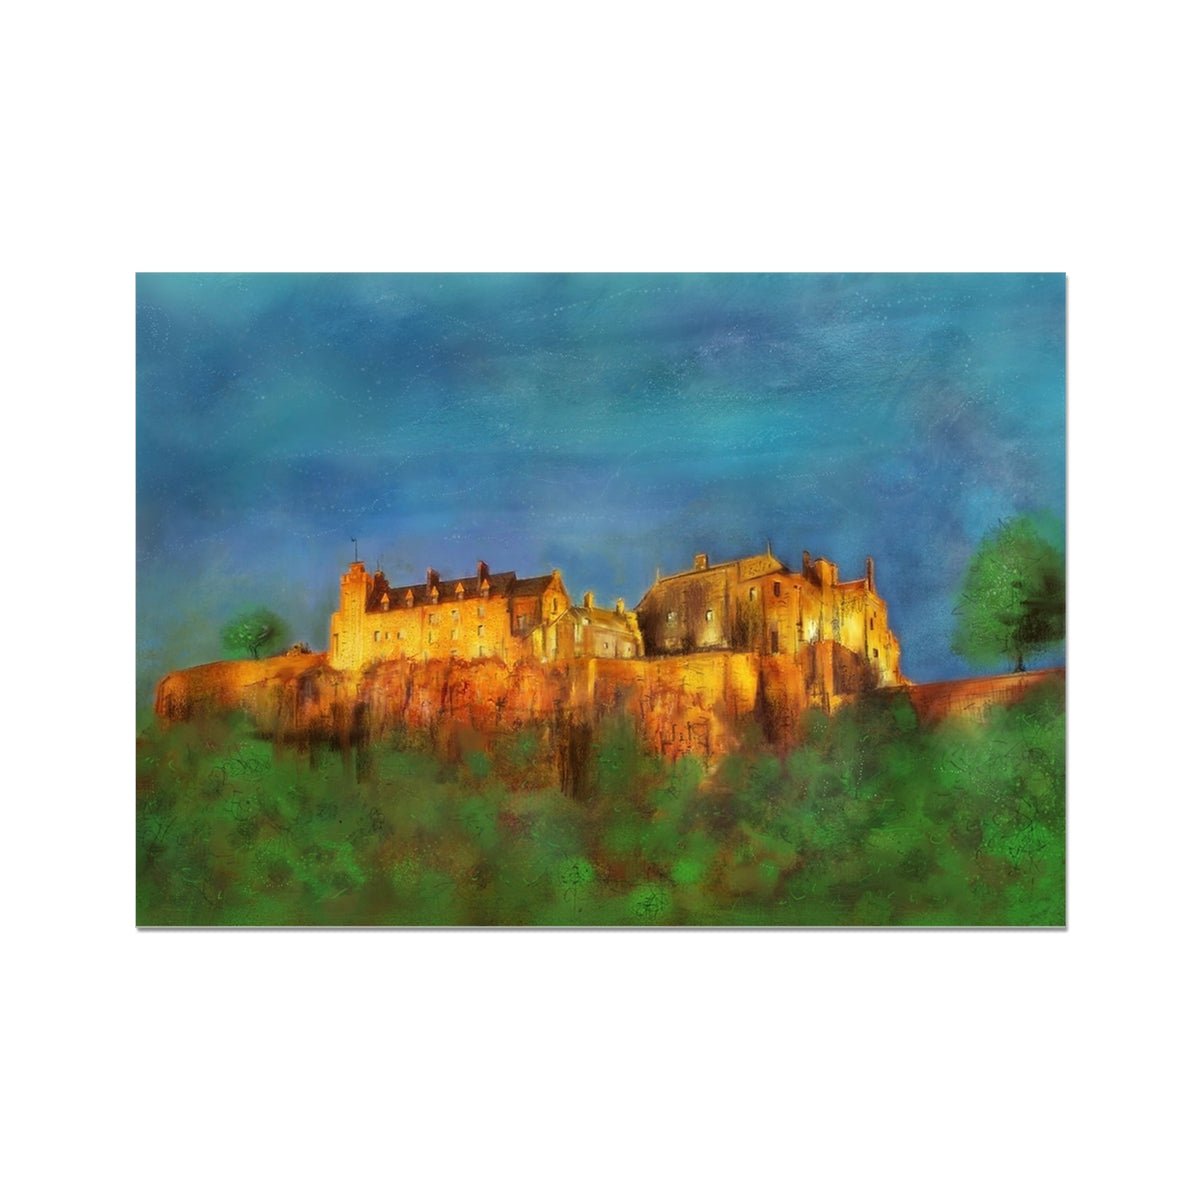 Stirling Castle Painting | Fine Art Prints From Scotland-Unframed Prints-Historic & Iconic Scotland Art Gallery-A2 Landscape-Paintings, Prints, Homeware, Art Gifts From Scotland By Scottish Artist Kevin Hunter